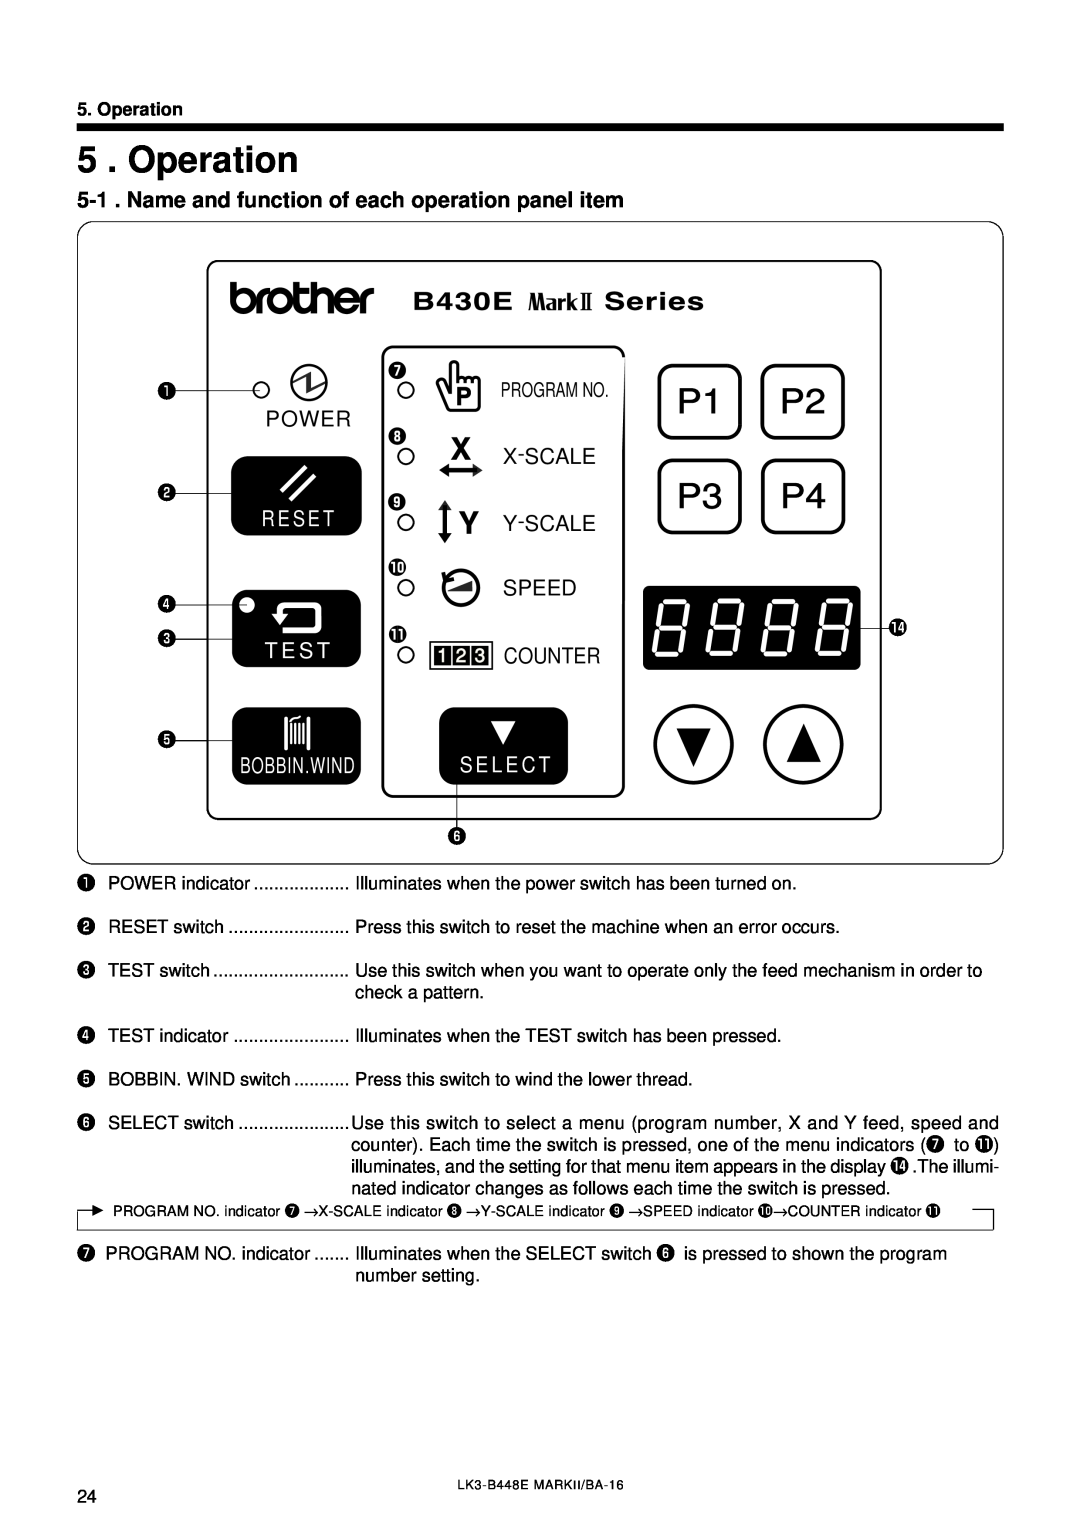 Brother LK3-B448E Operation, P1 P2 P3 P4, Name and function of each operation panel item, Power, R E S E T, T E S T 